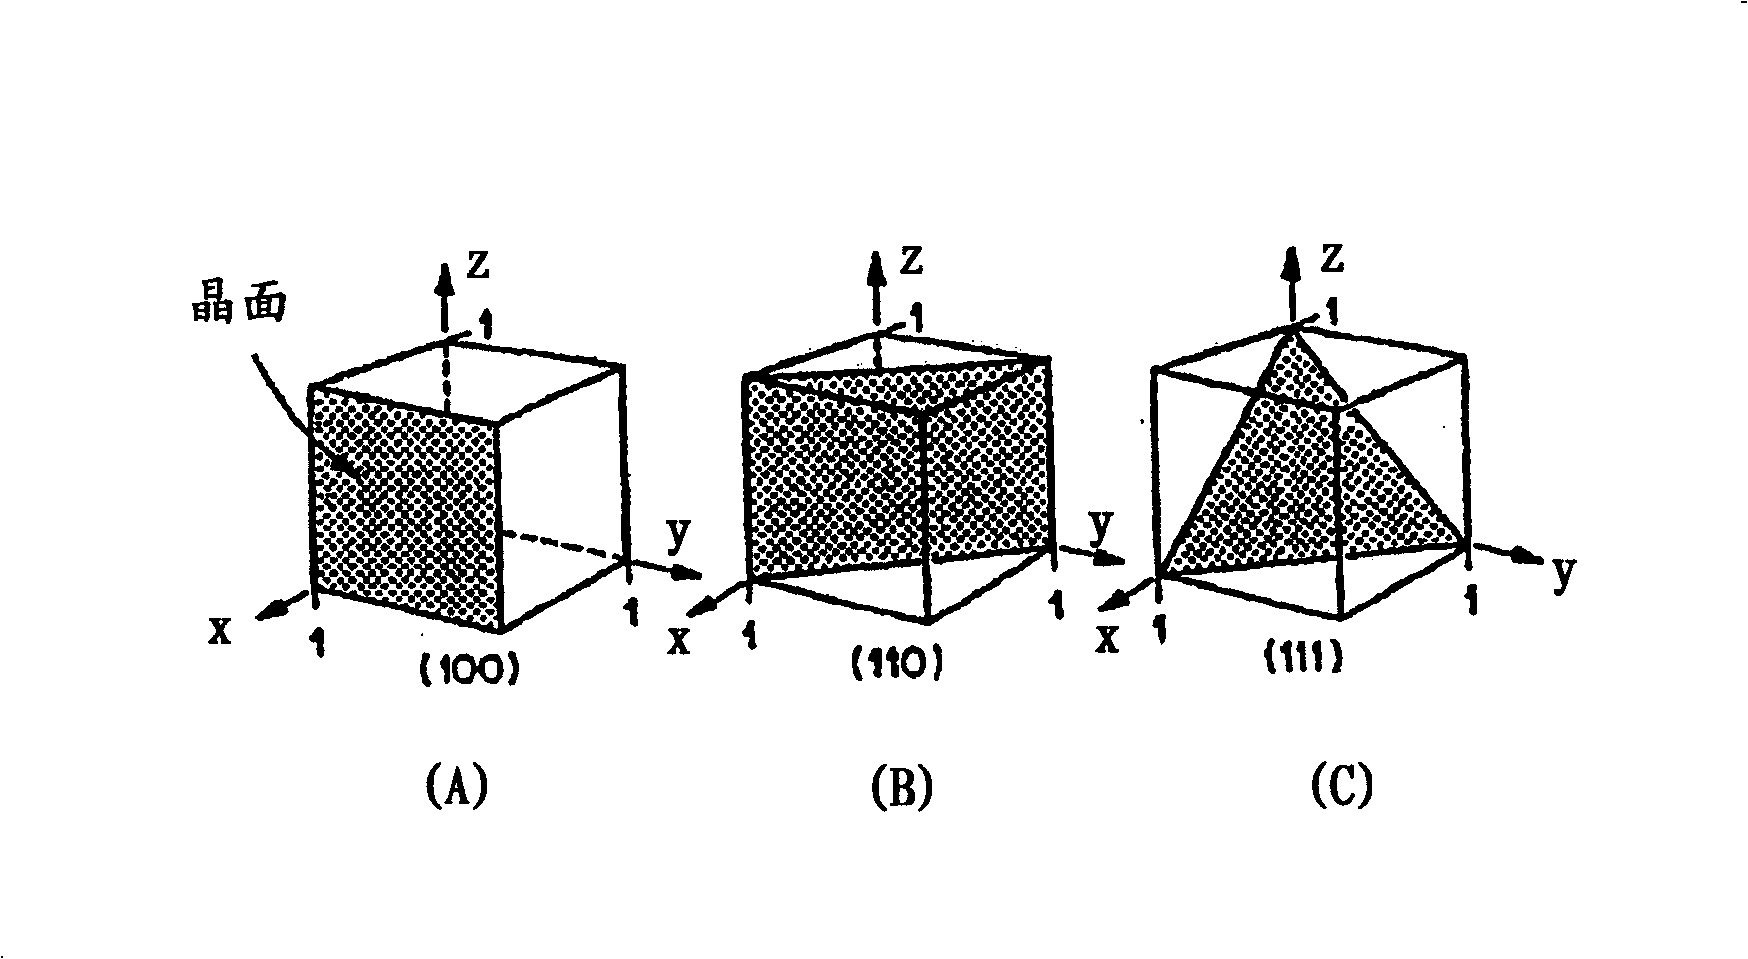 Lattice-mismatched semiconductor structures with reduced dislocation defect densities related methods for device fabrication